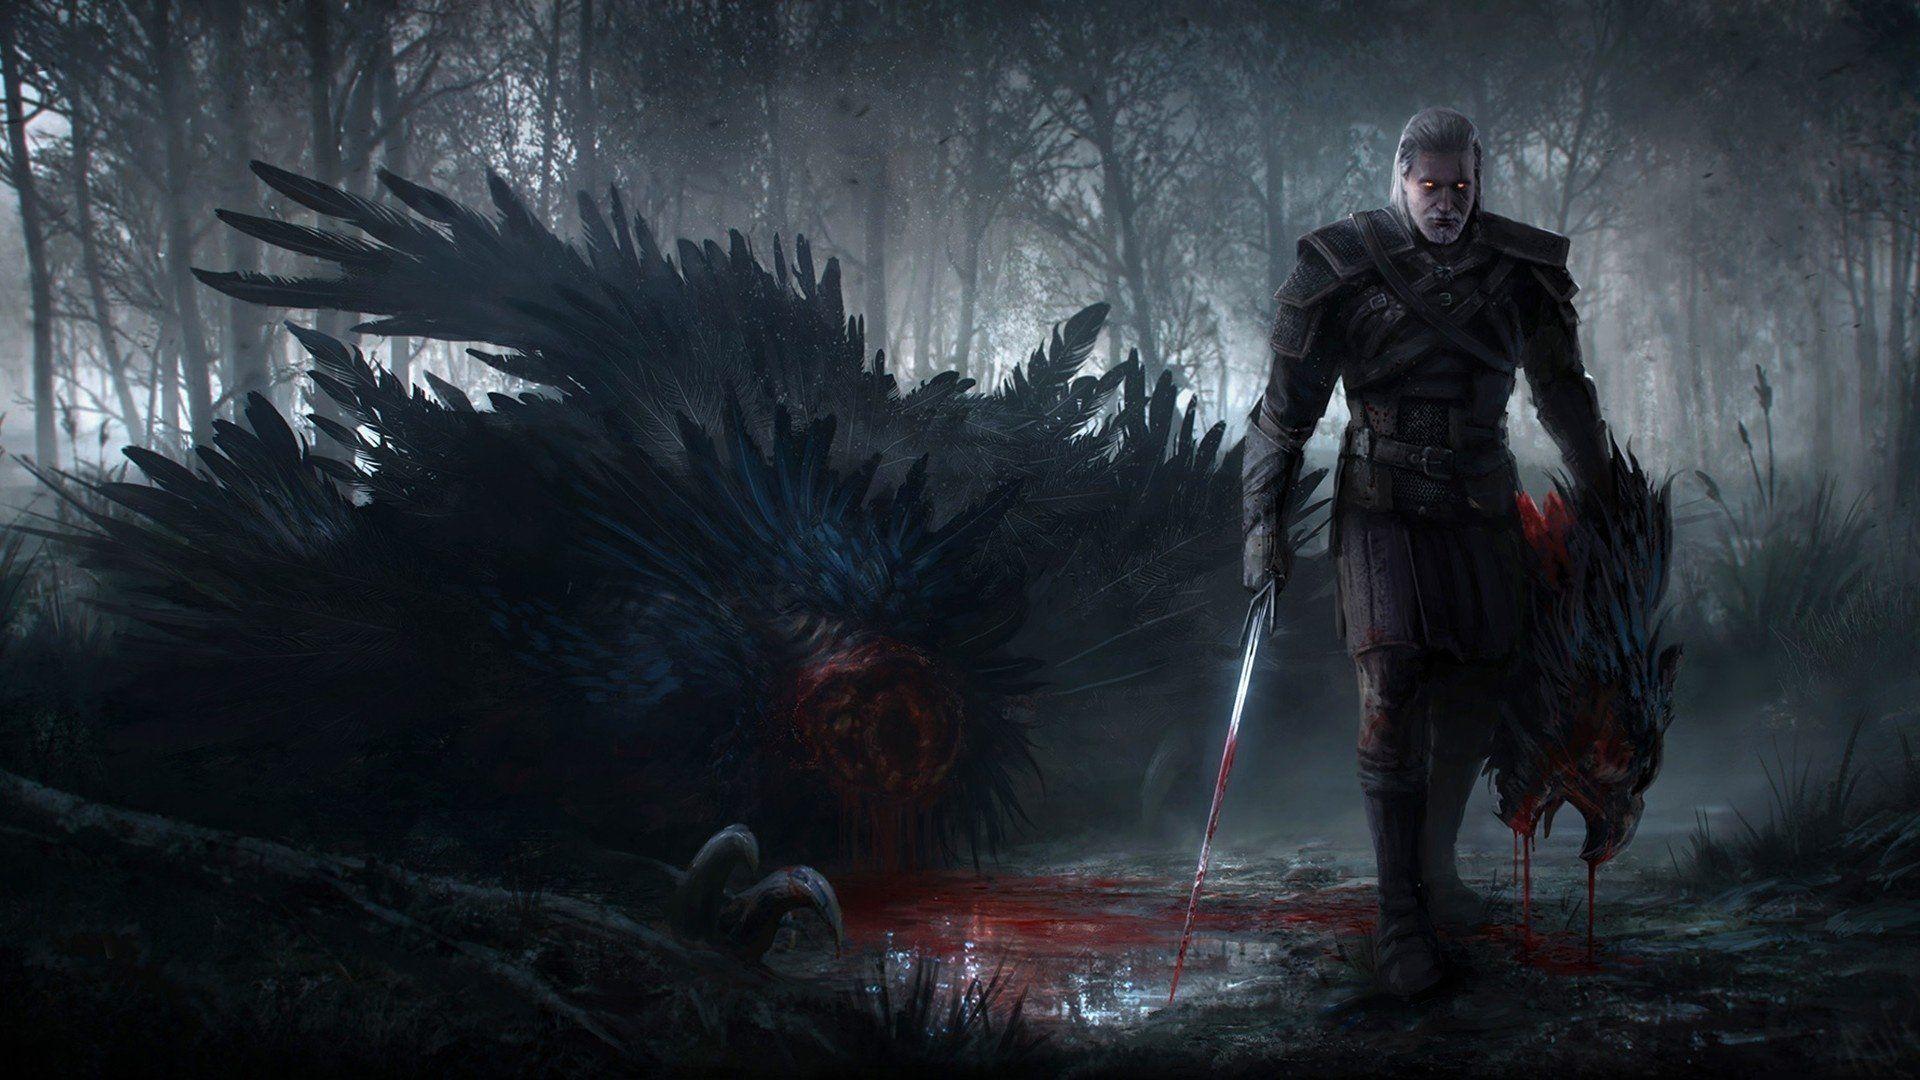 The Witcher 1920X1080 Wallpaper Free The Witcher 1920X1080 Background